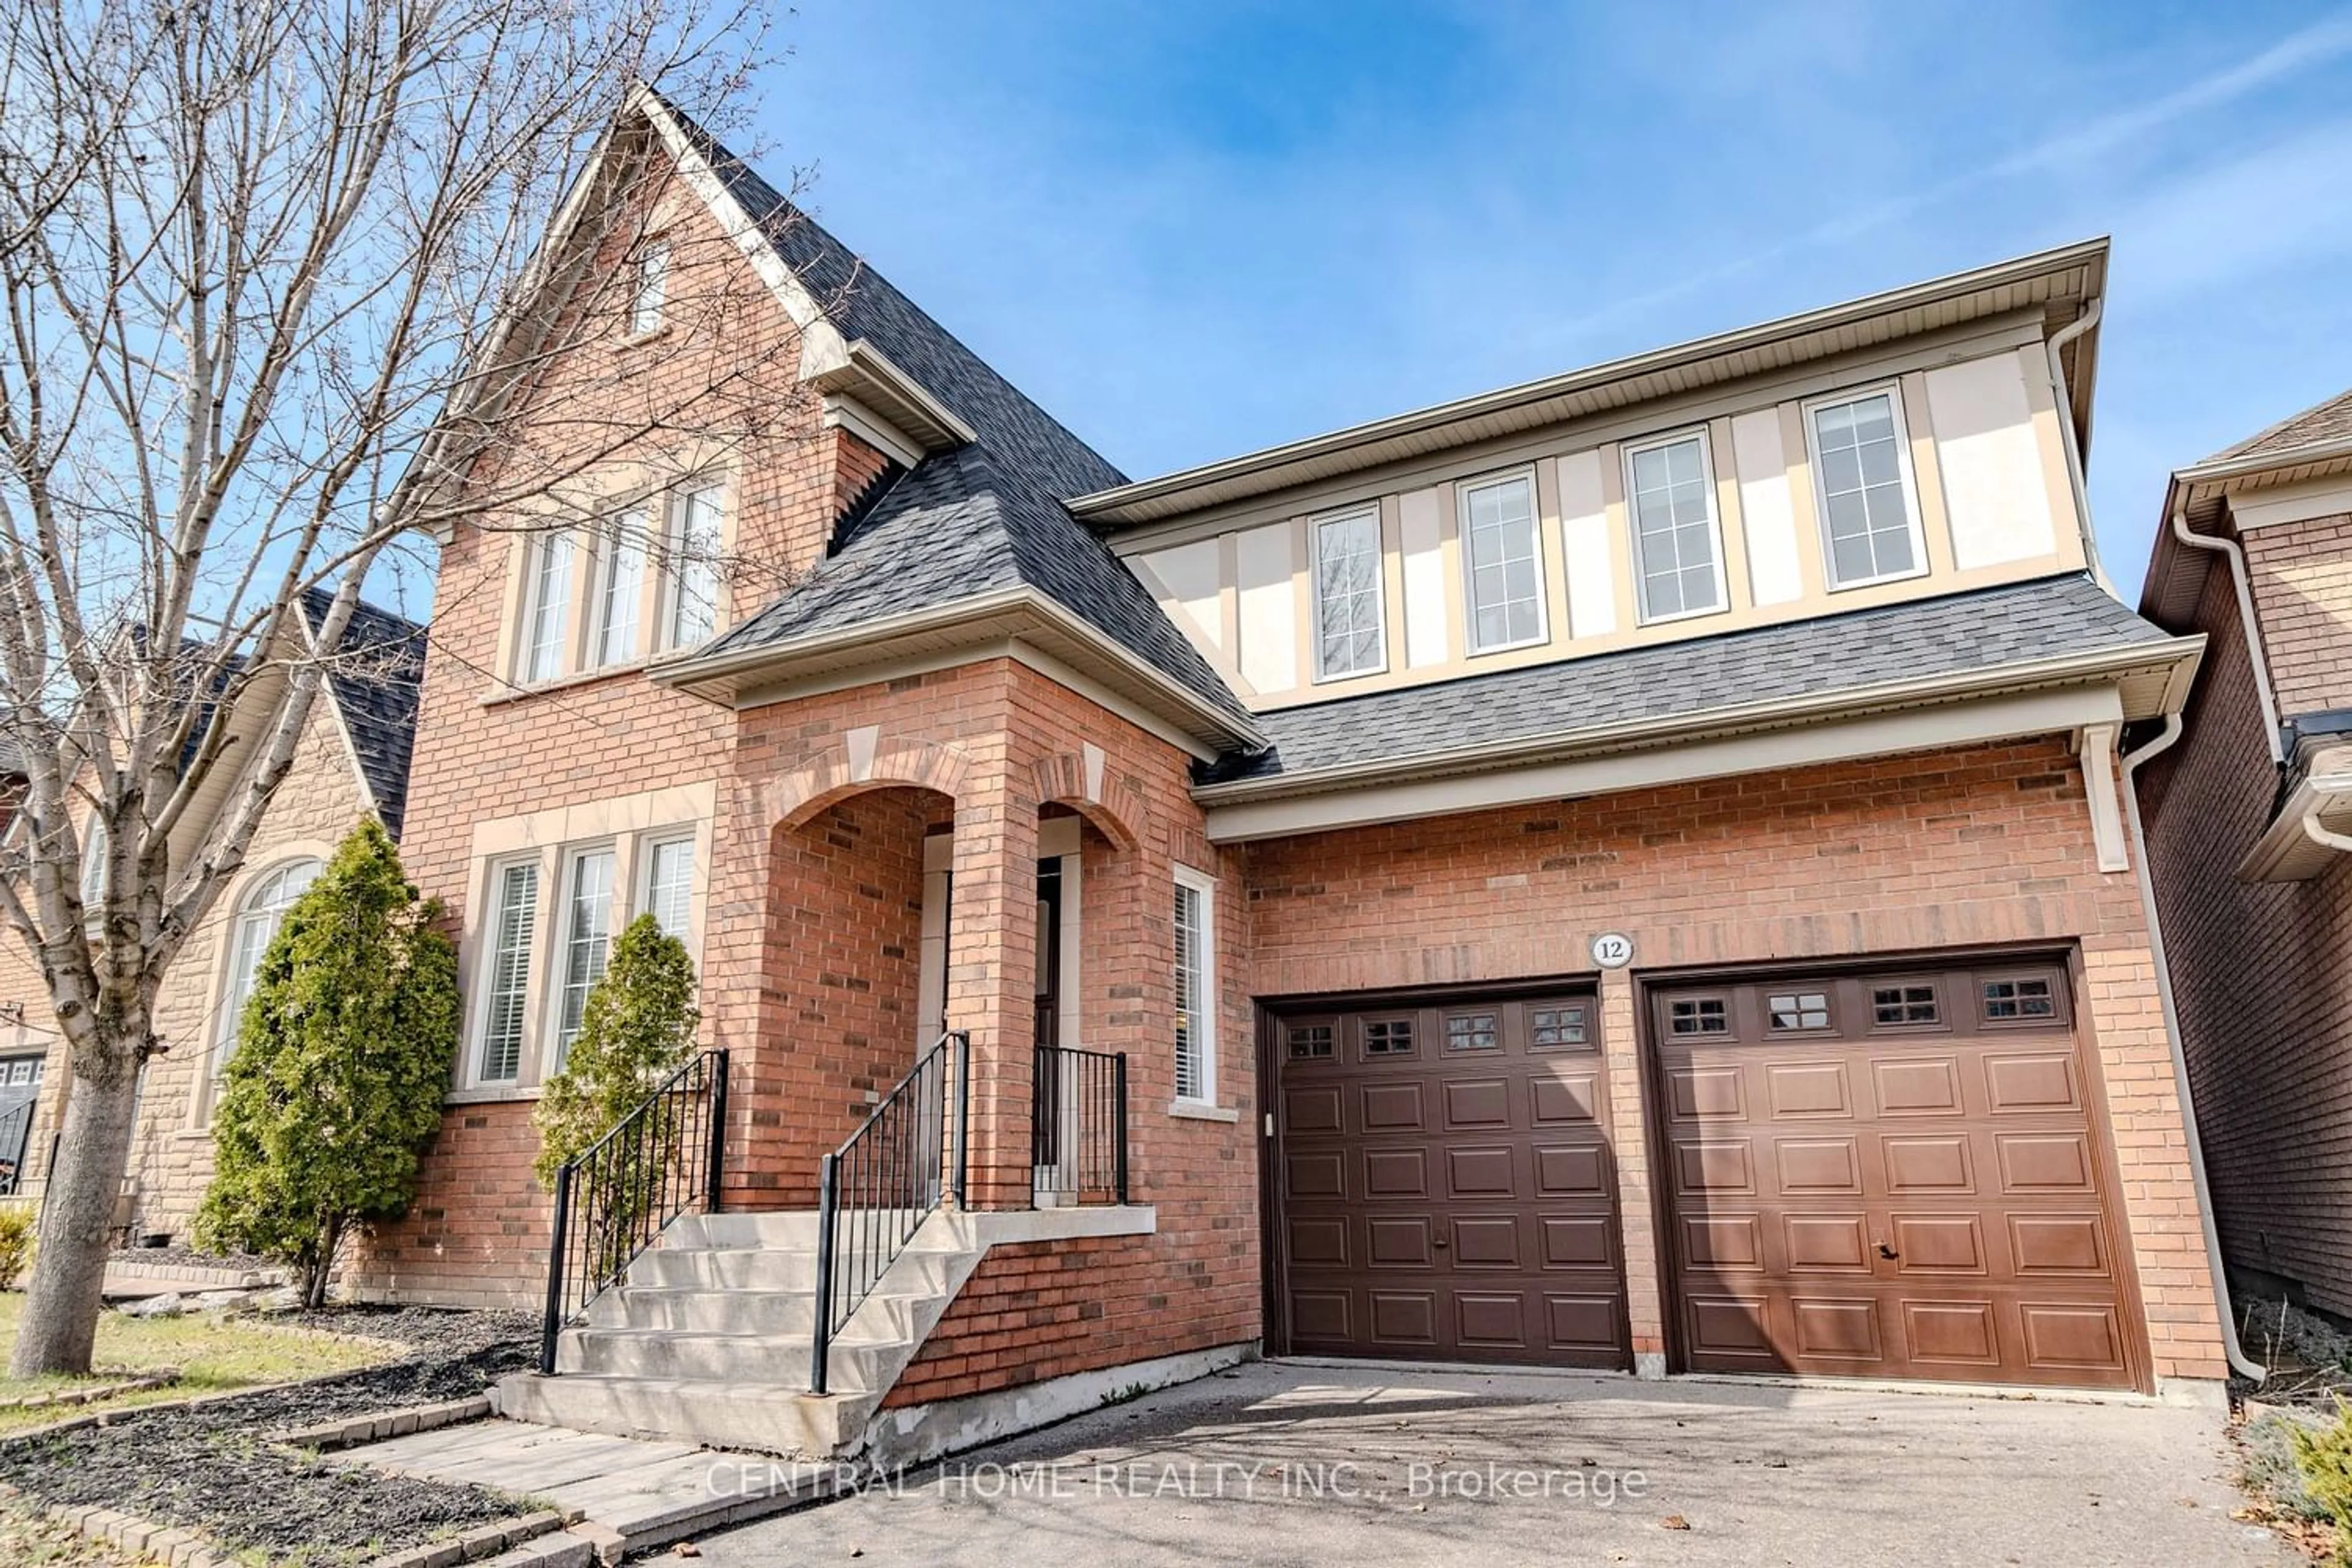 Home with brick exterior material for 12 Hayfield Cres, Richmond Hill Ontario L4E 0A3